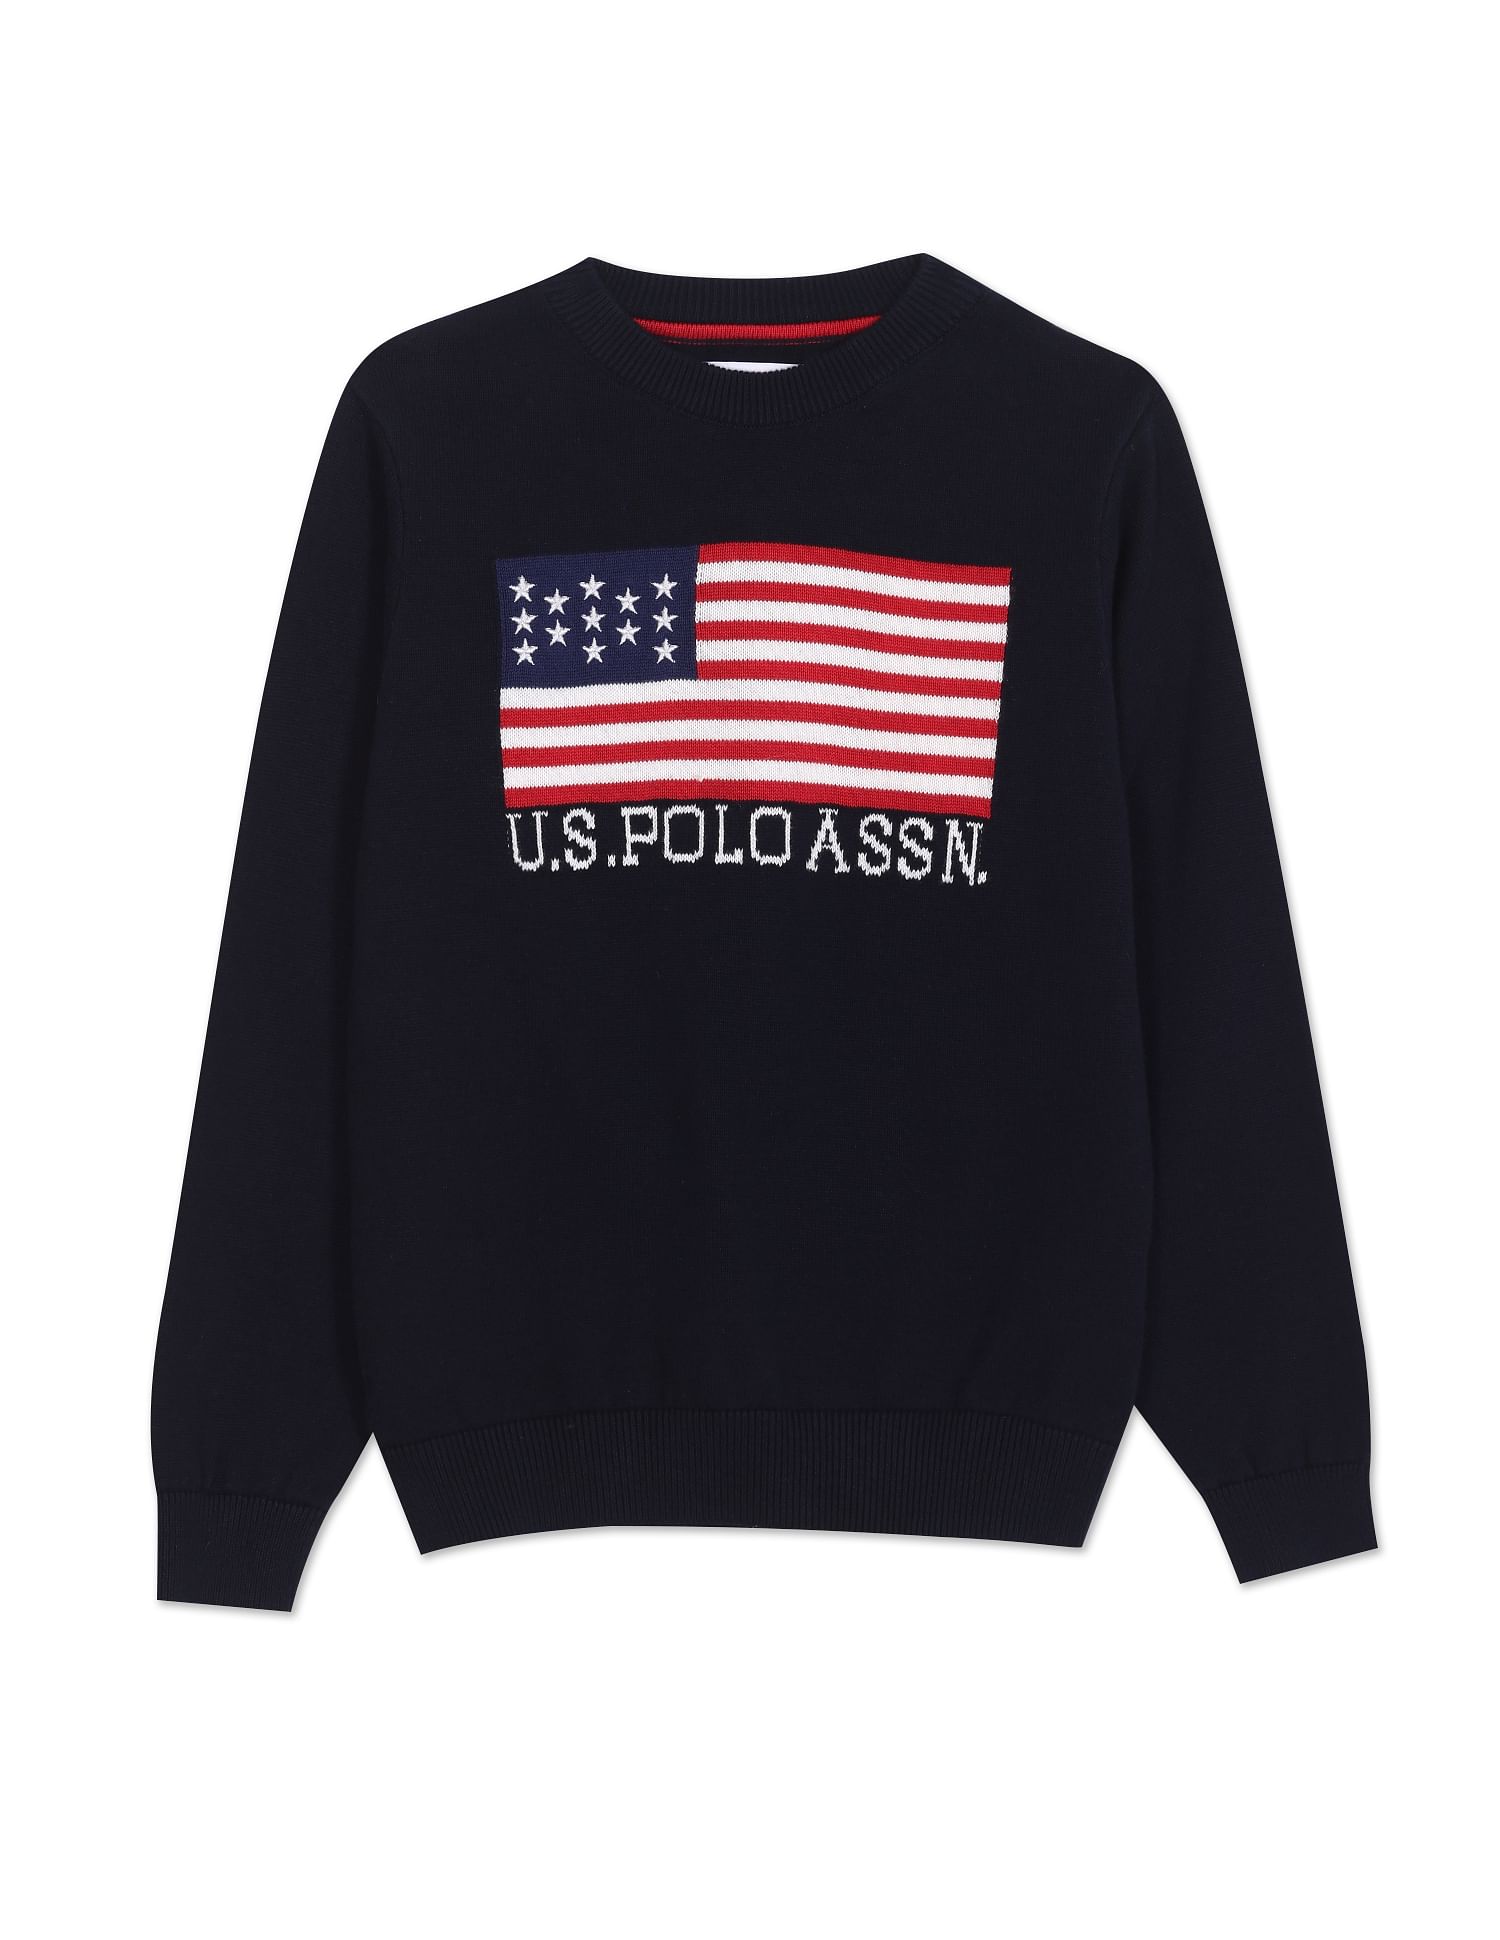 Boys Crew Neck Patterned Knit Cotton Sweater – U.S. Polo Assn. India